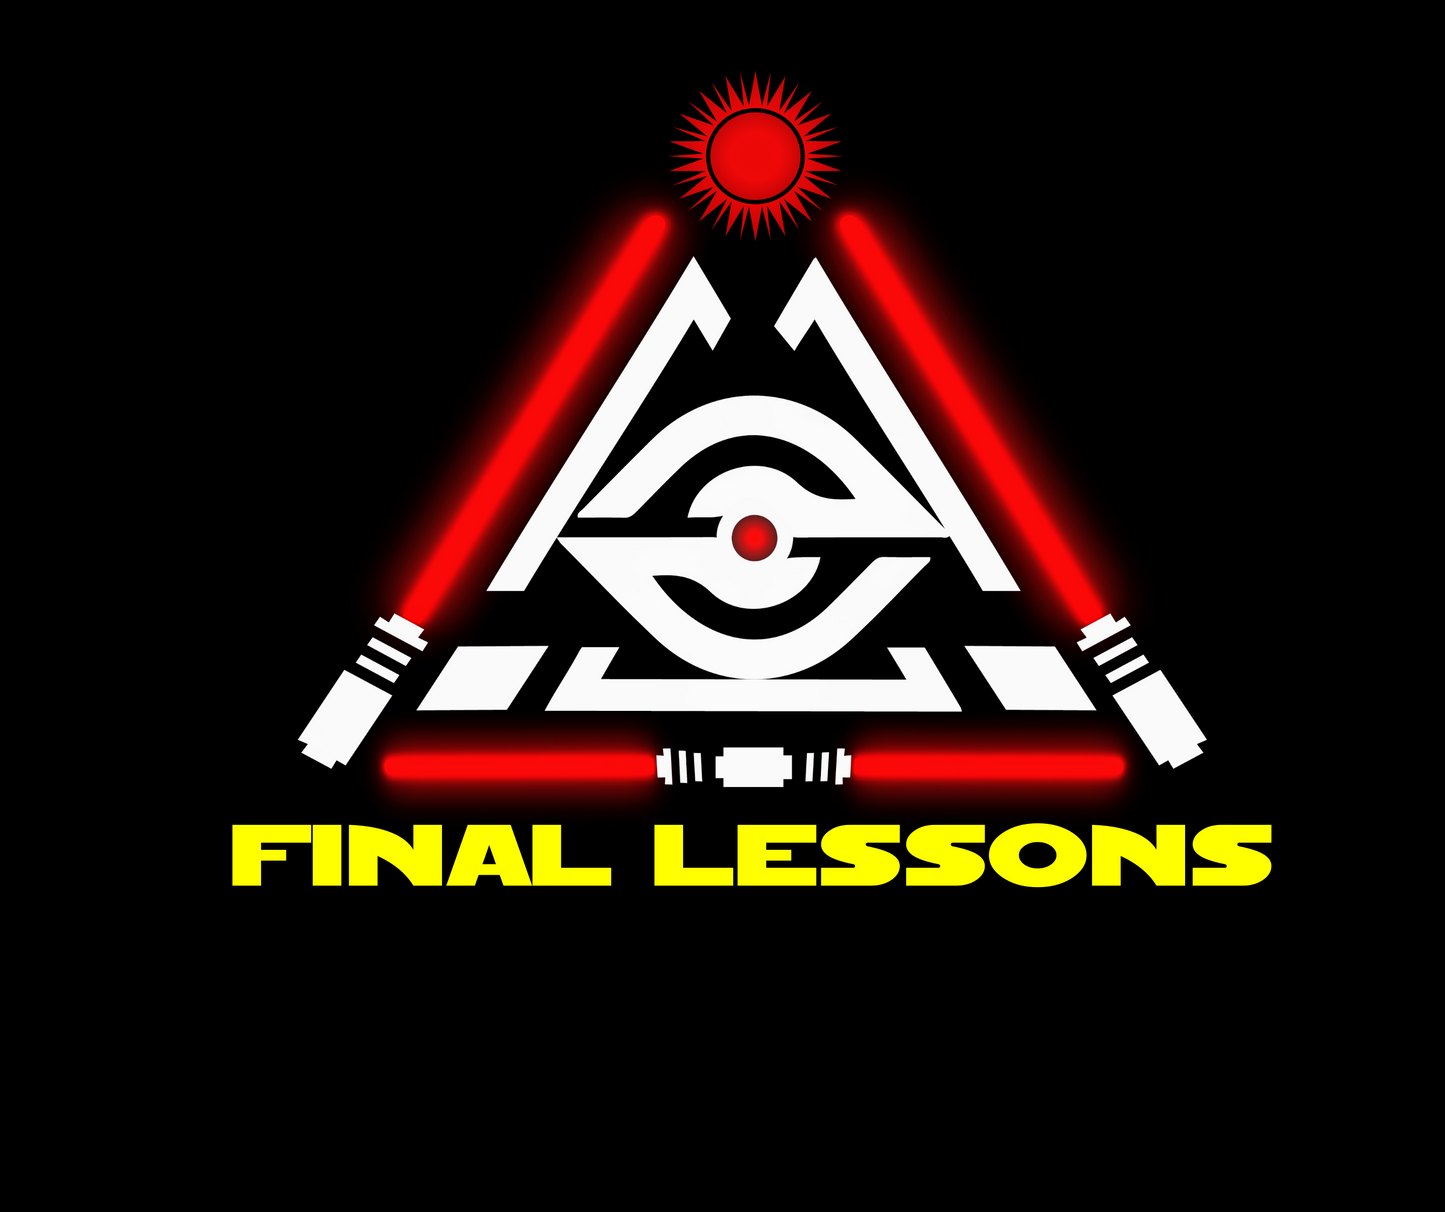 Final Lessons